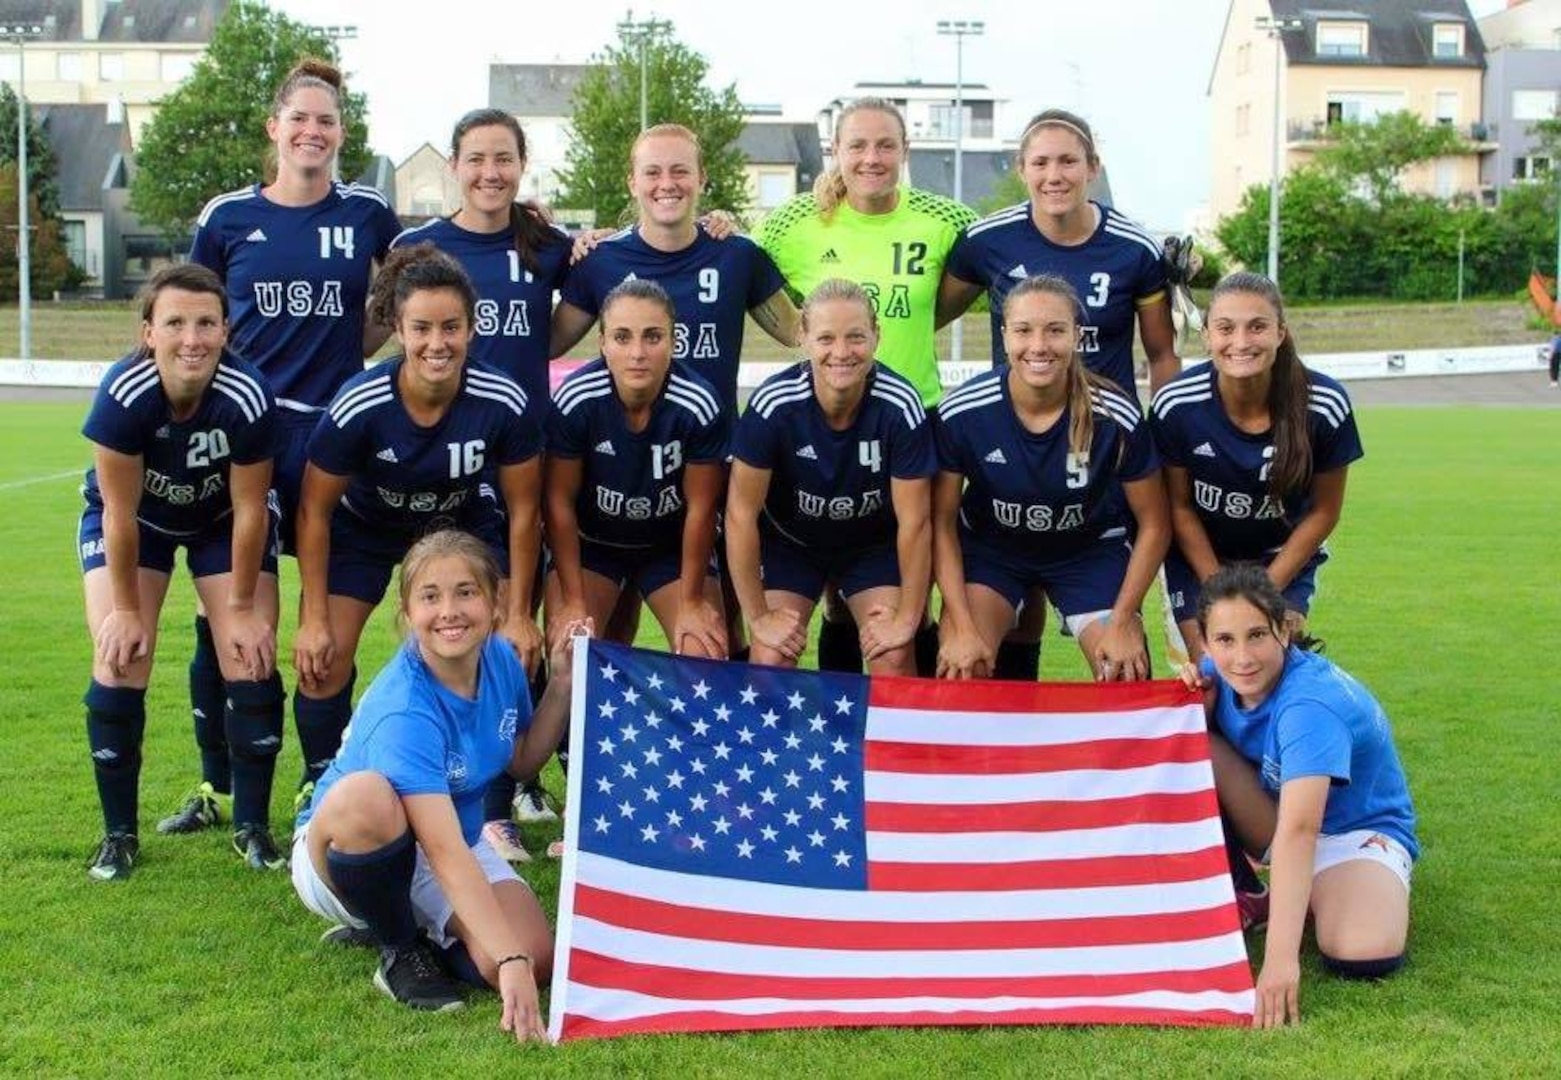 RENNES, France  (May 31, 2016) -- U.S. Armed Forces Women's Soccer Team prior to facing South Korea in the 2016 World Women's Football Cup on 31 May.  The 2016 Conseil International du Sport Militaire (CISM) World Football Cup was hosted in Rennes, France 24 May to 6 June, 2016. Then 1st Lt. Kate Herren stands fifth from left, back row. Herren is currently on the first Armed Forces Sports All-Service Women's Rugby Team. (courtesy photo)